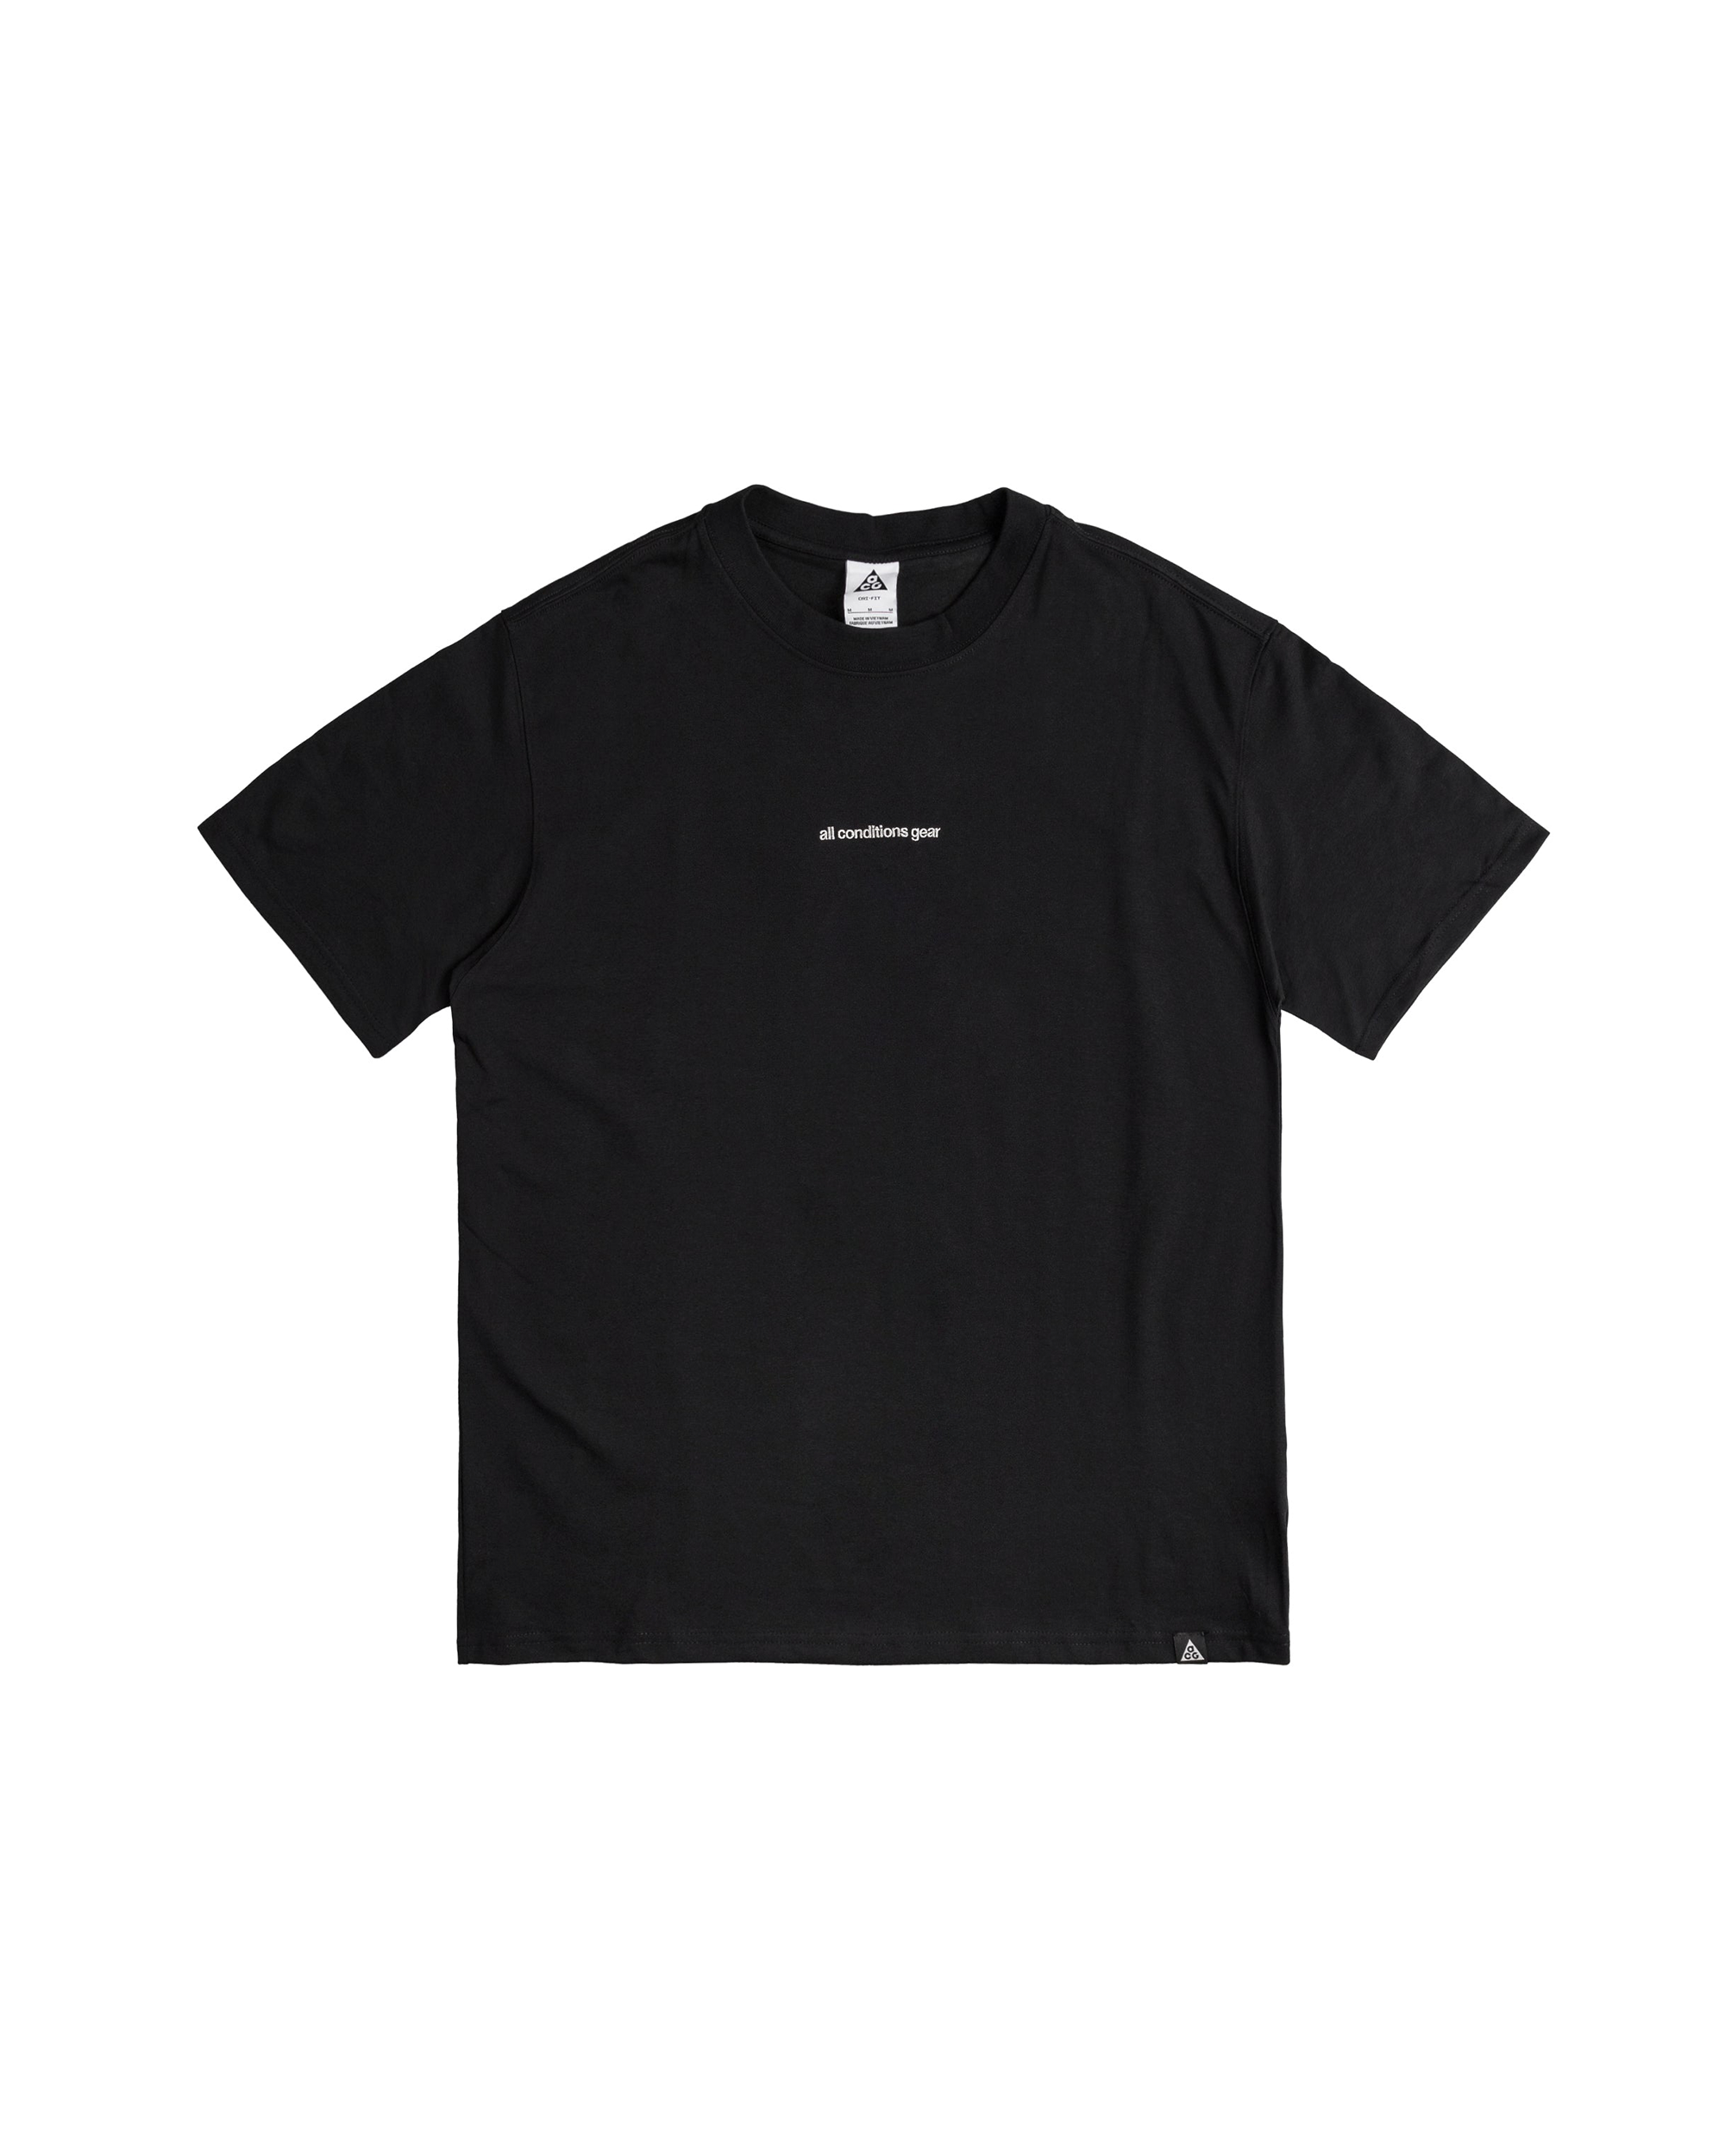 All Conditions T-shirt - Black